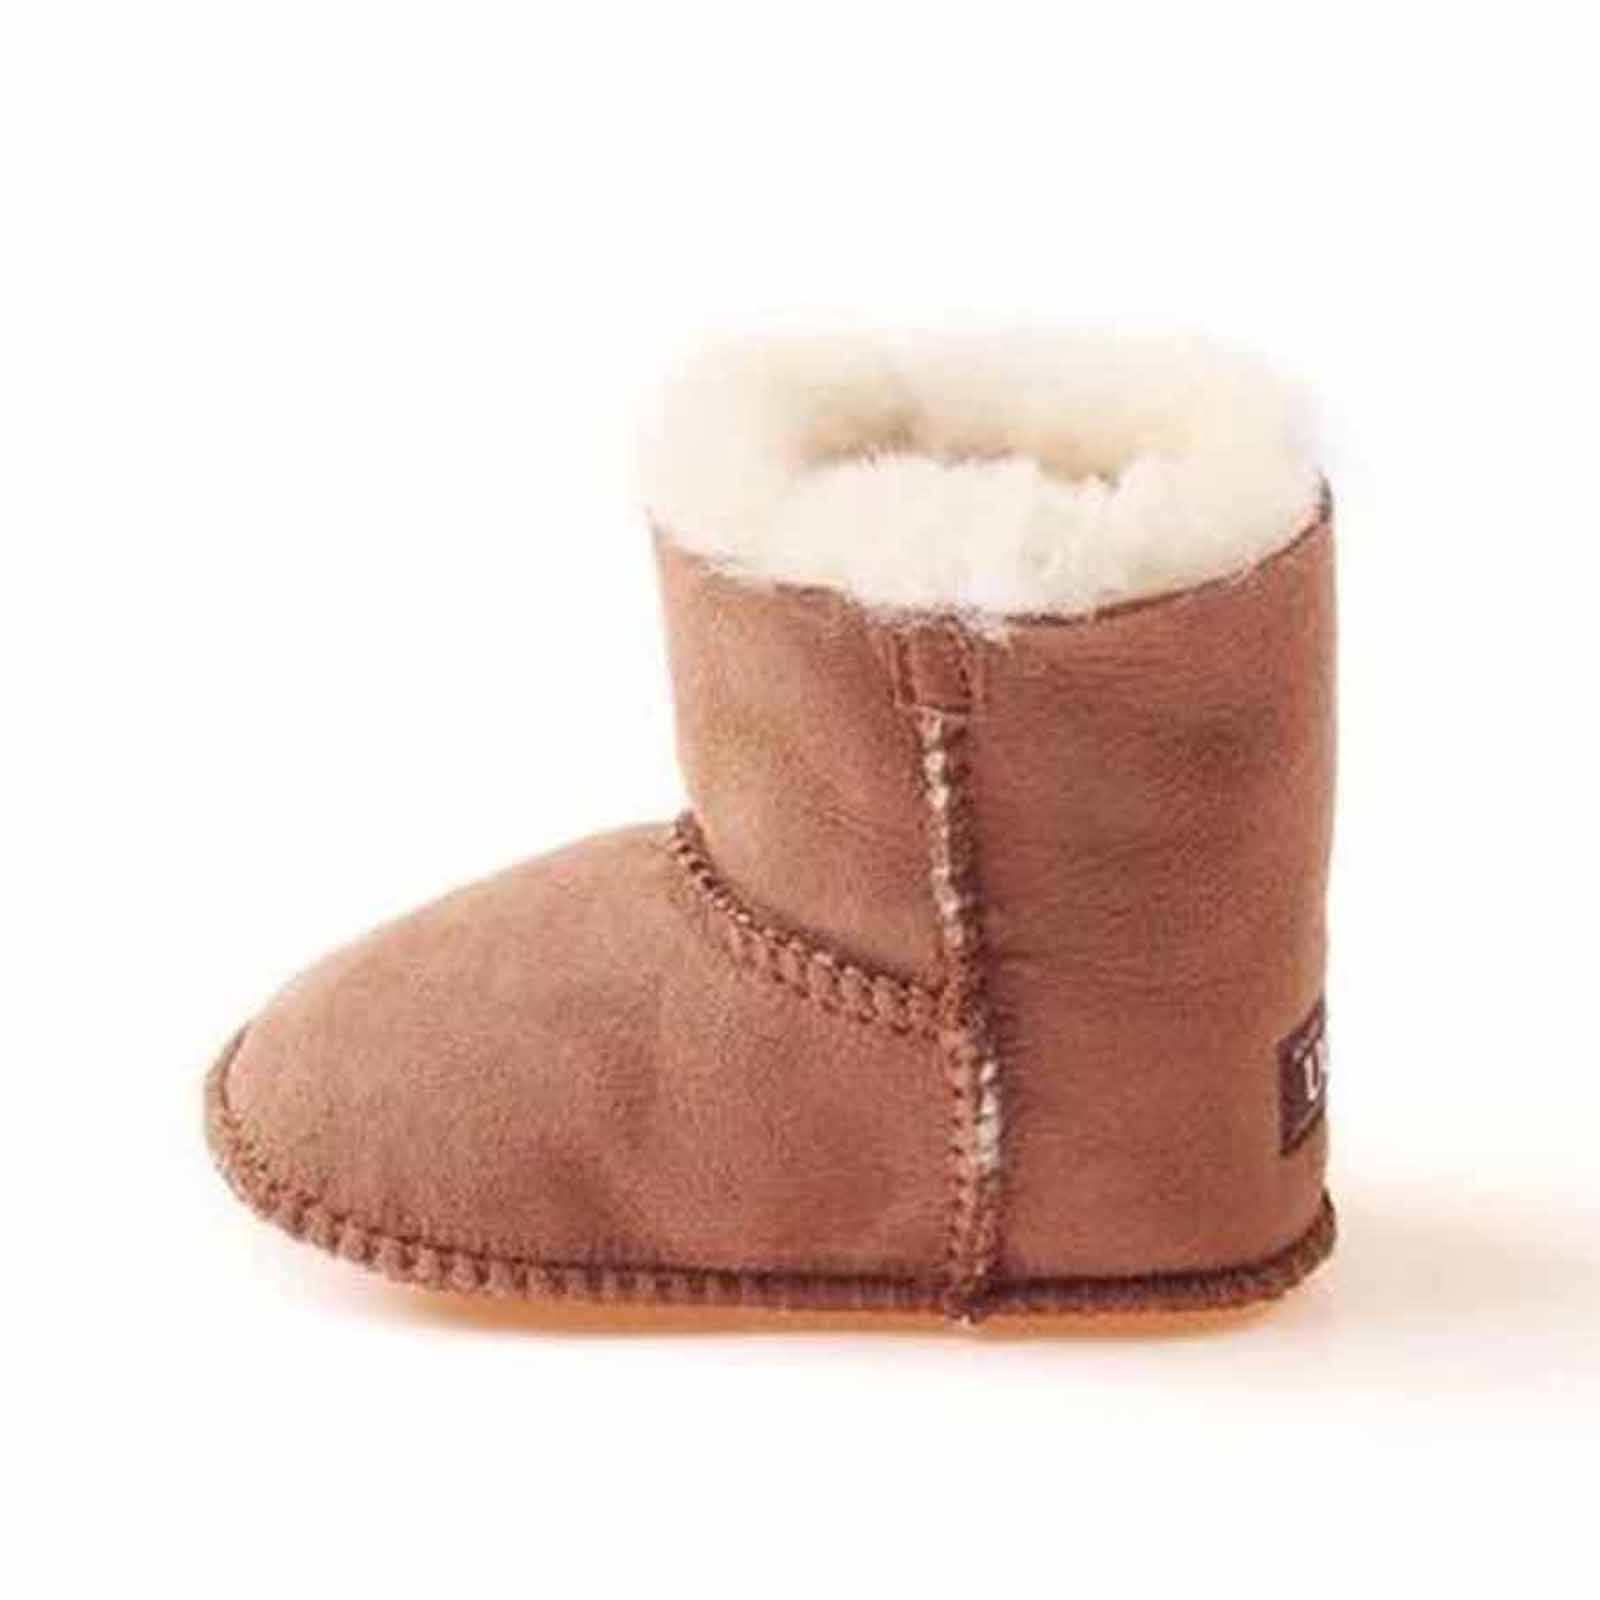 Ozwear UGG Boots Classic Baby Chestnut